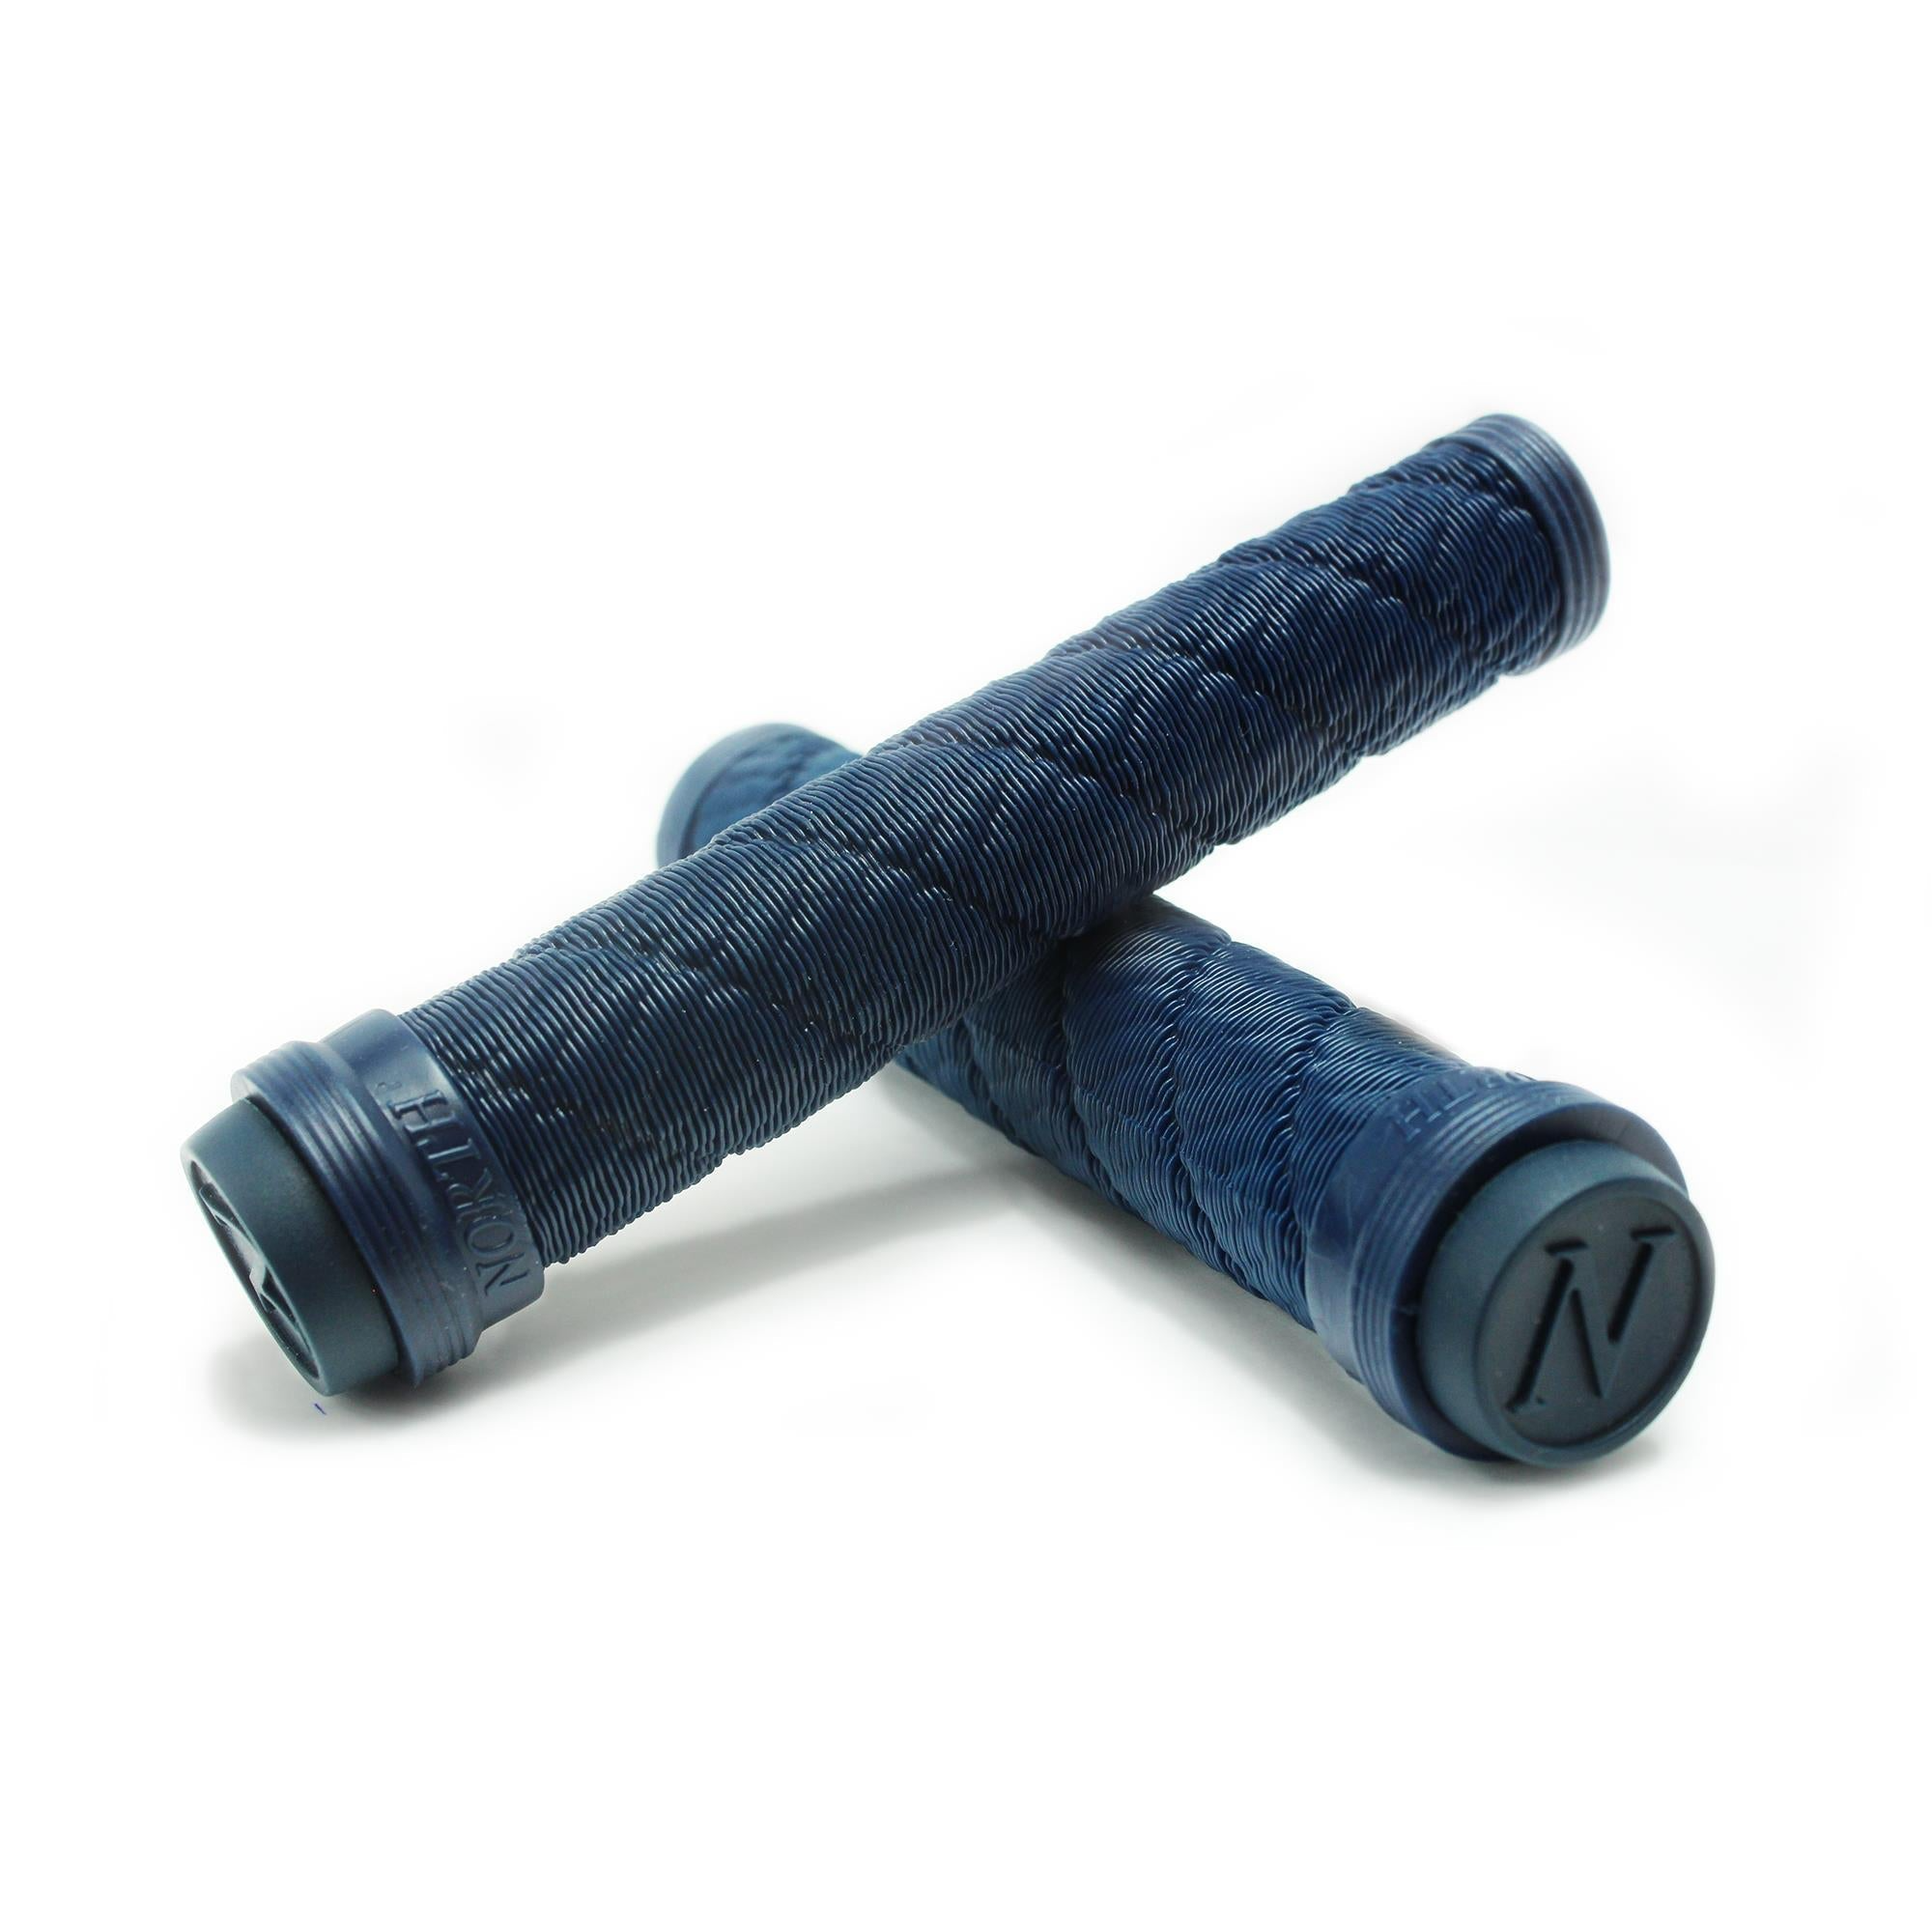 SCOOTER GRIPS - Legacy Pro Scooters